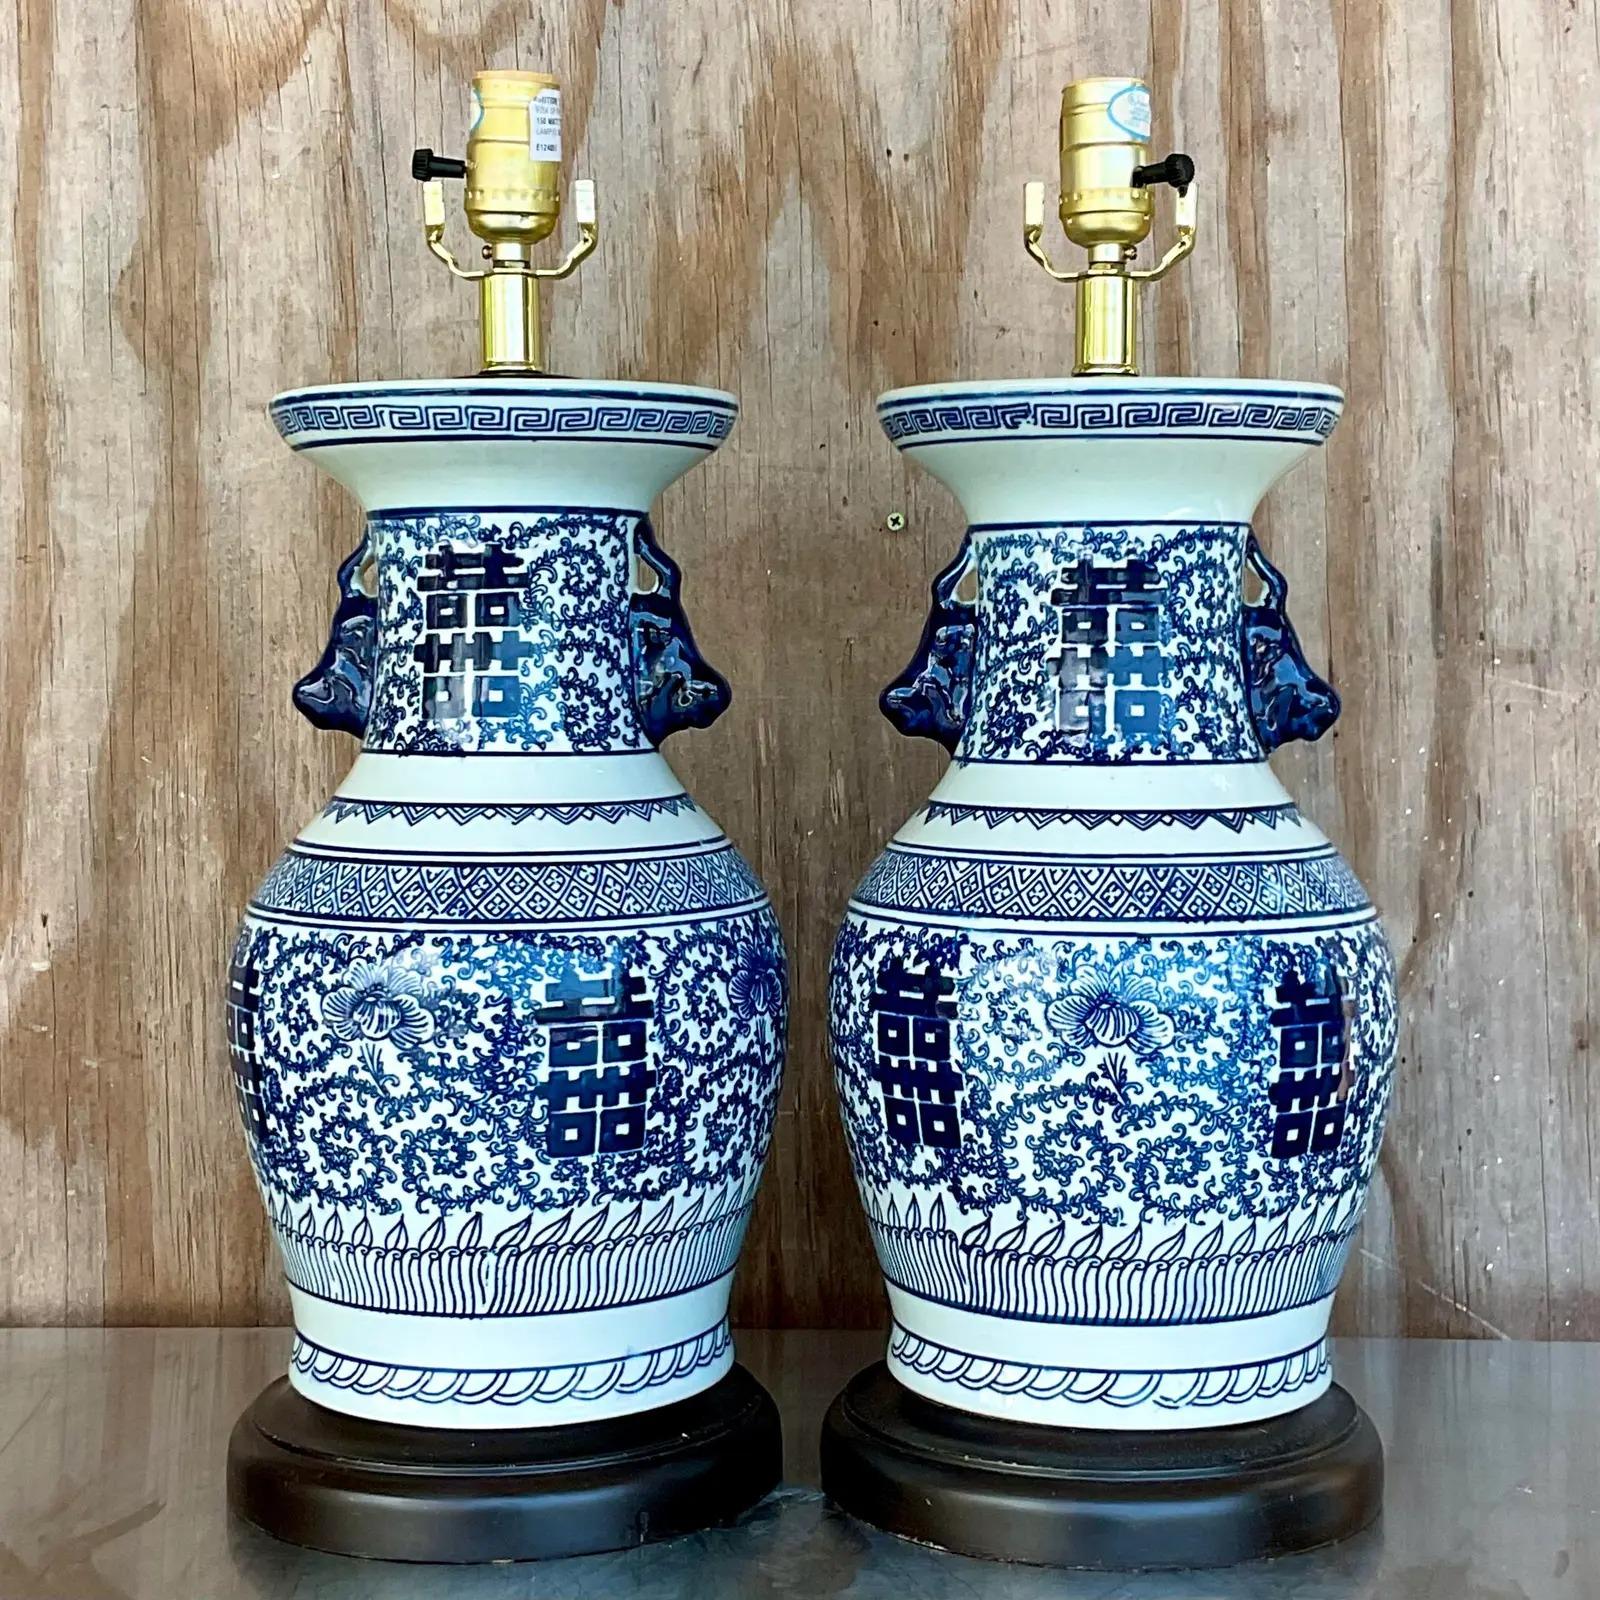 North American Vintage Asian Blue and White Glazed Ceramic Lamps - a Pair For Sale